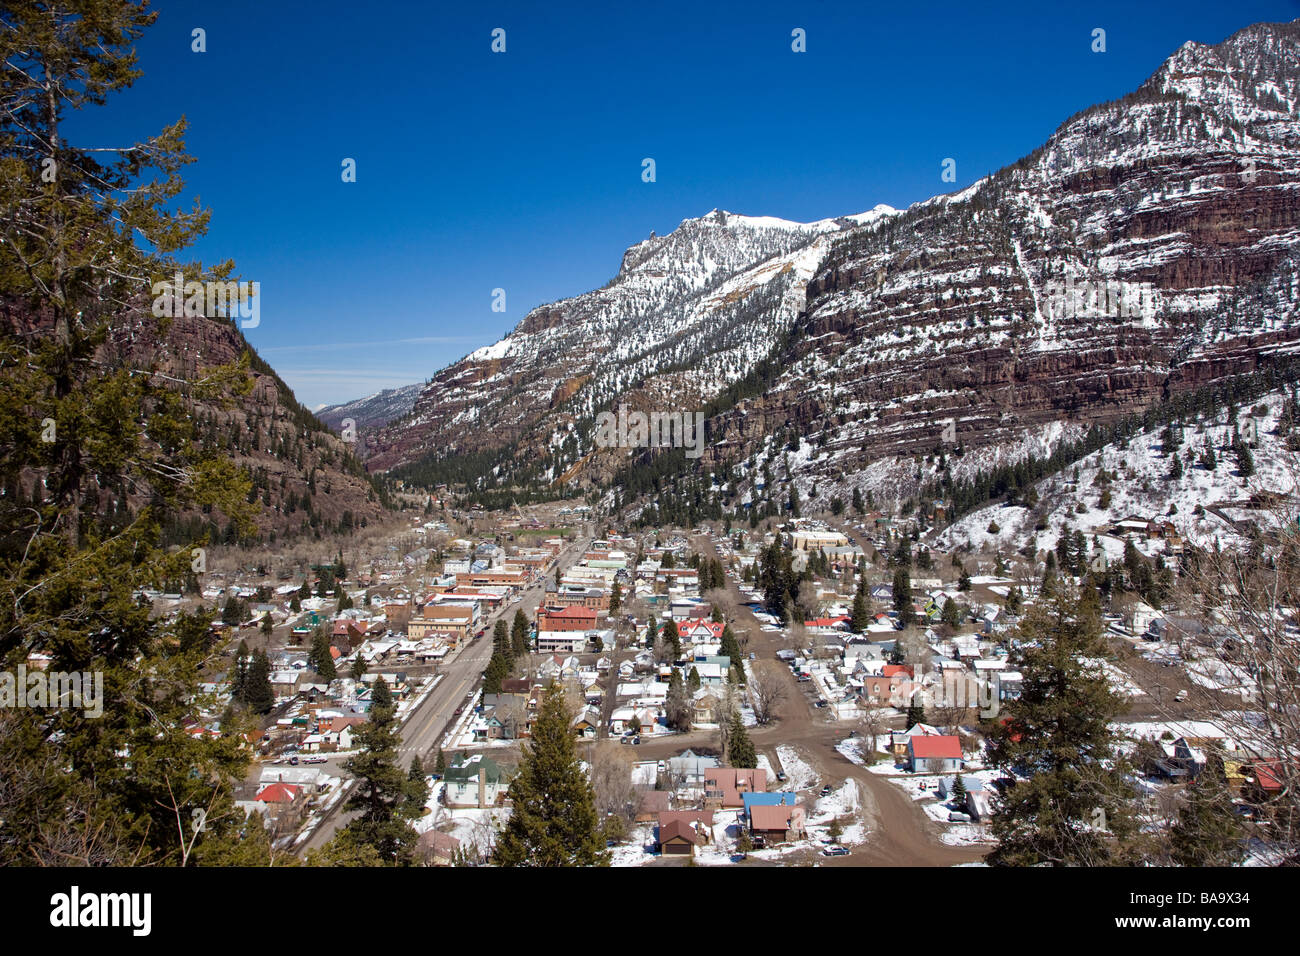 Winter view of the town of Ouray along The Million Dollar Highway western Colorado M D H is part of the San Juan Skyway Byway Stock Photo